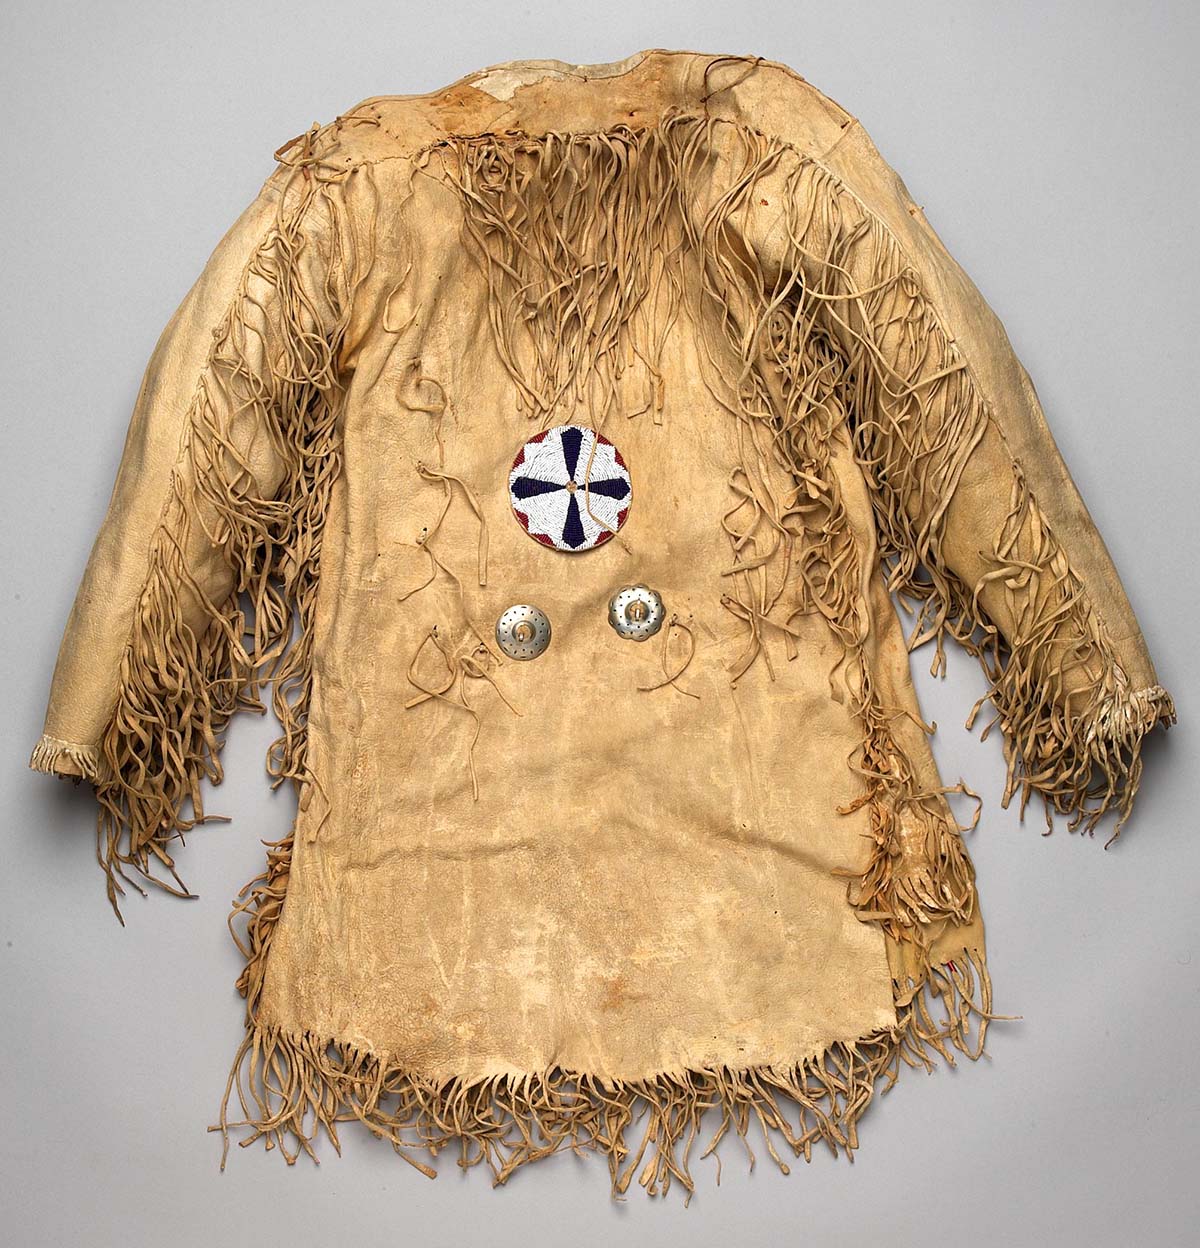 Mountain man's fringe leather jerkin shirt decorated with two nickel conchas and a large beaded rosette, undated. Gift of Richard W. Leche. NA.202.588